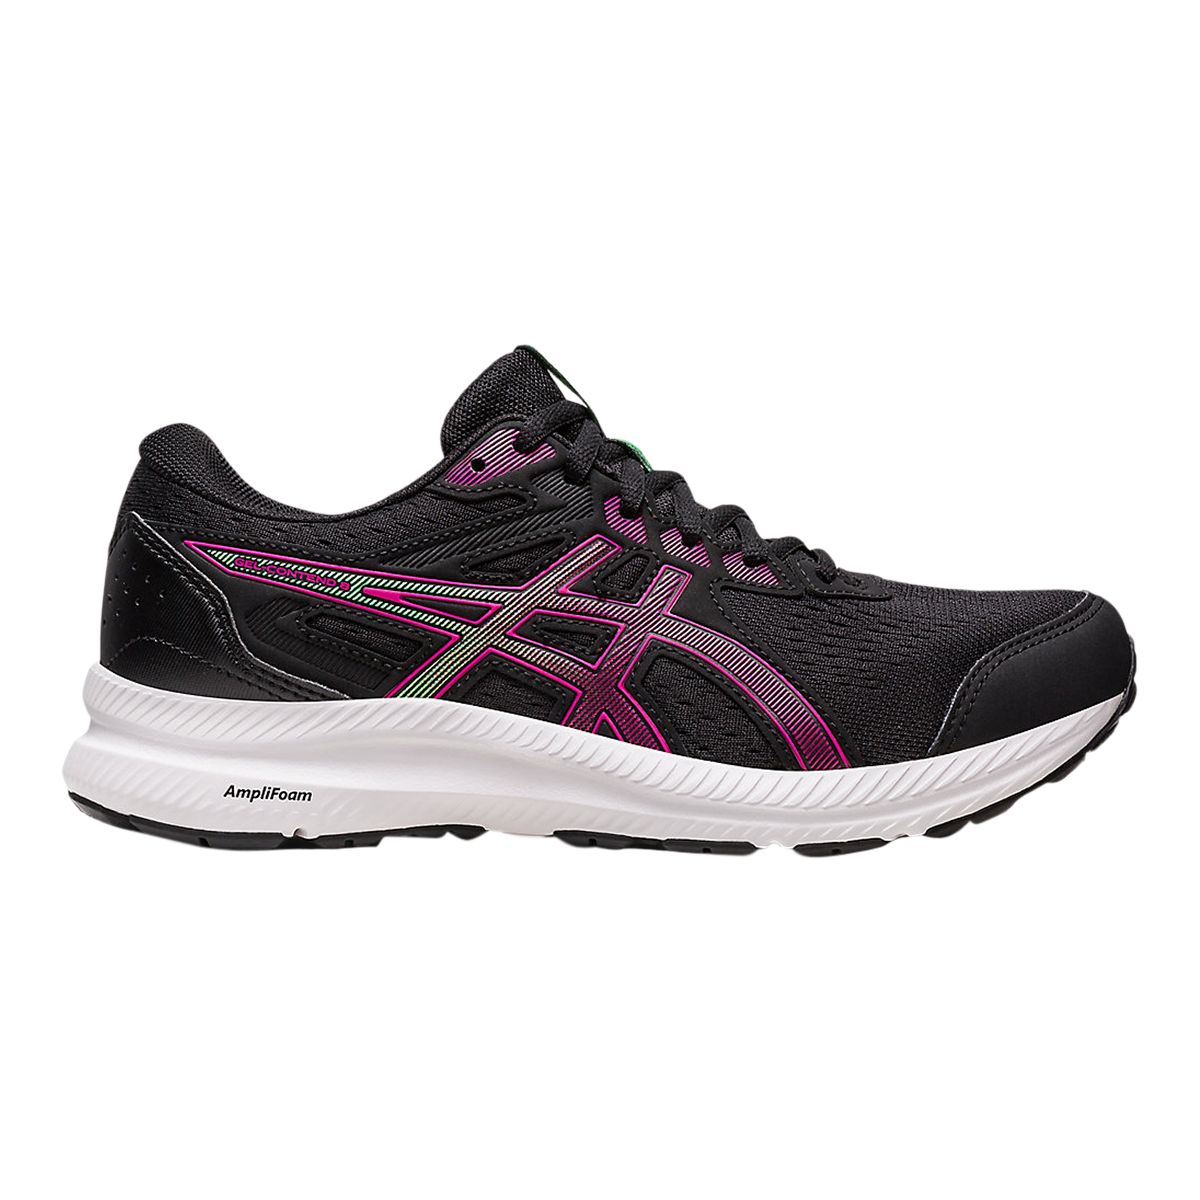 Image of Asics Women's Gel-Contend 8 Training Shoes